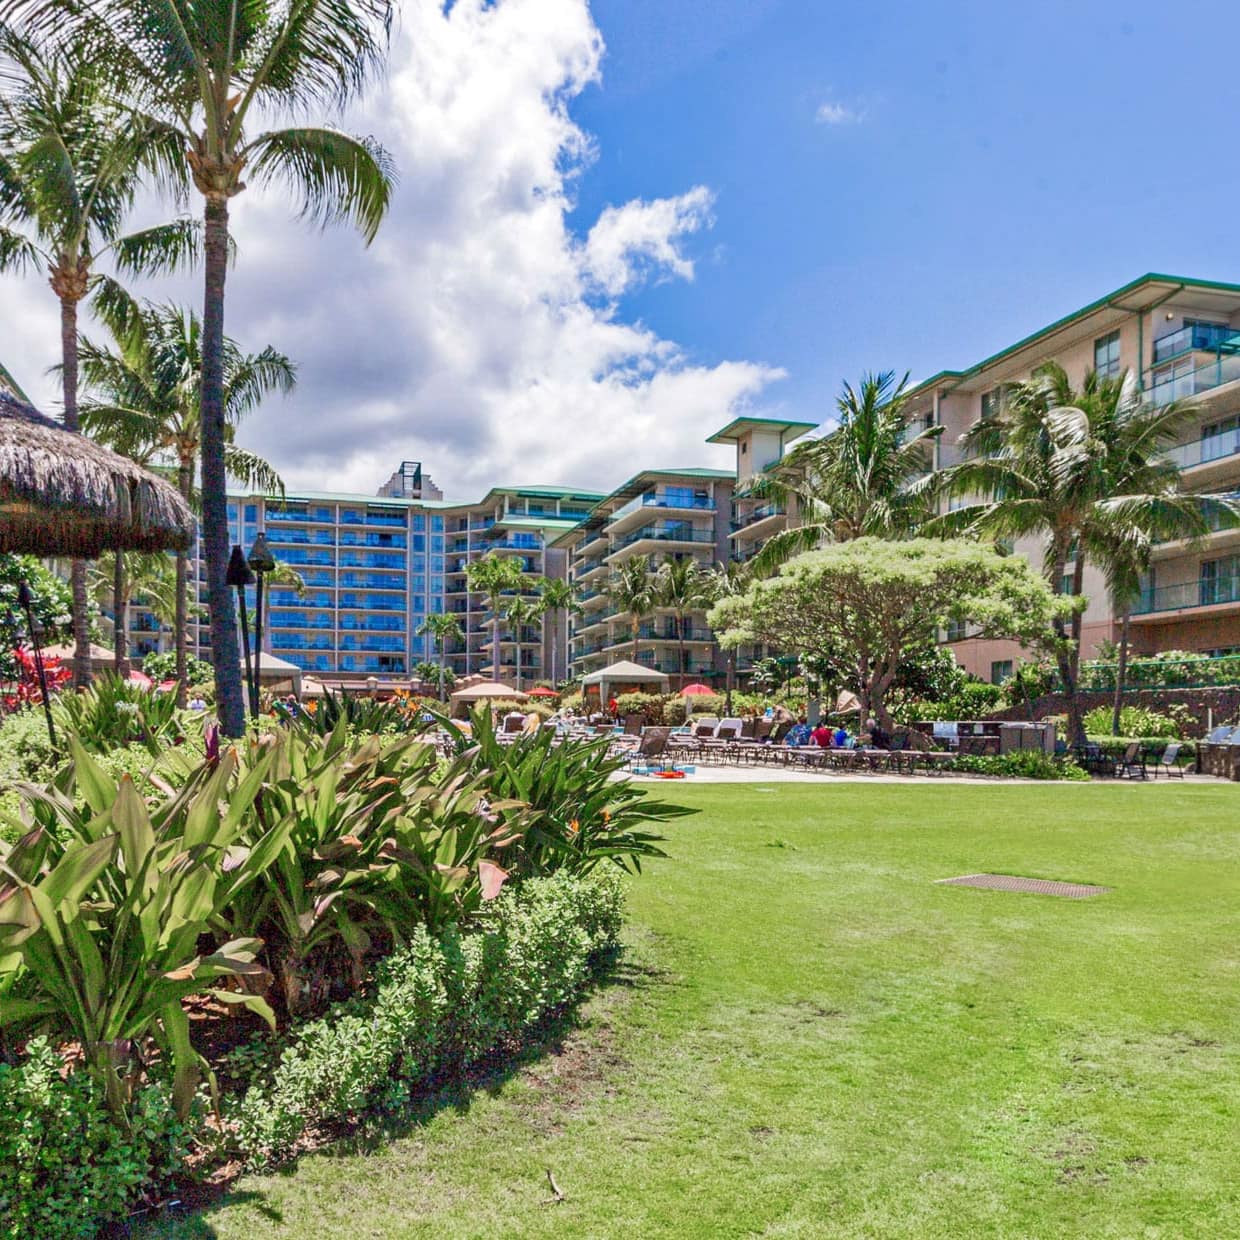 Maui resort condos with lush garden, palm trees, and pool in Hawaii